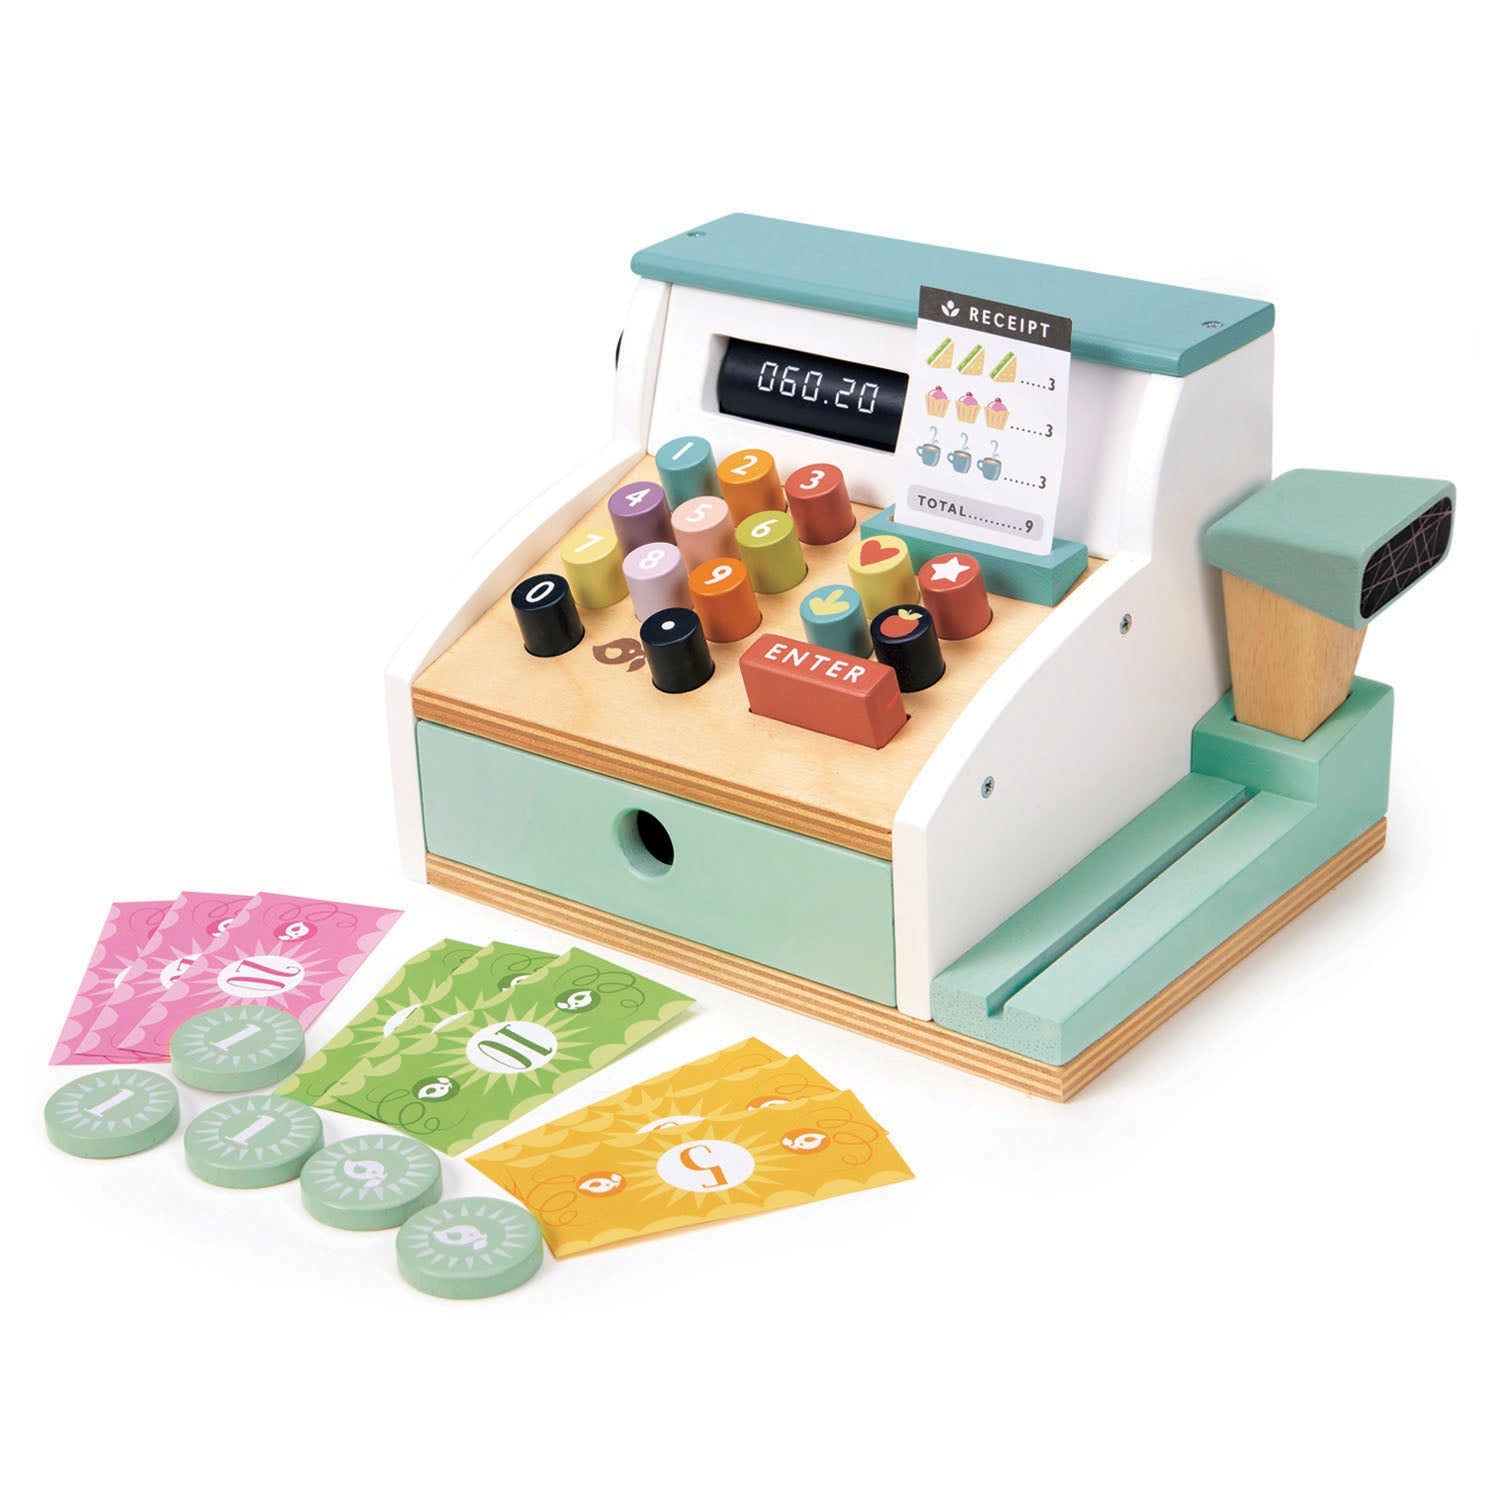 tender leaf toys colourful cash register with a scanner, money and a receipt